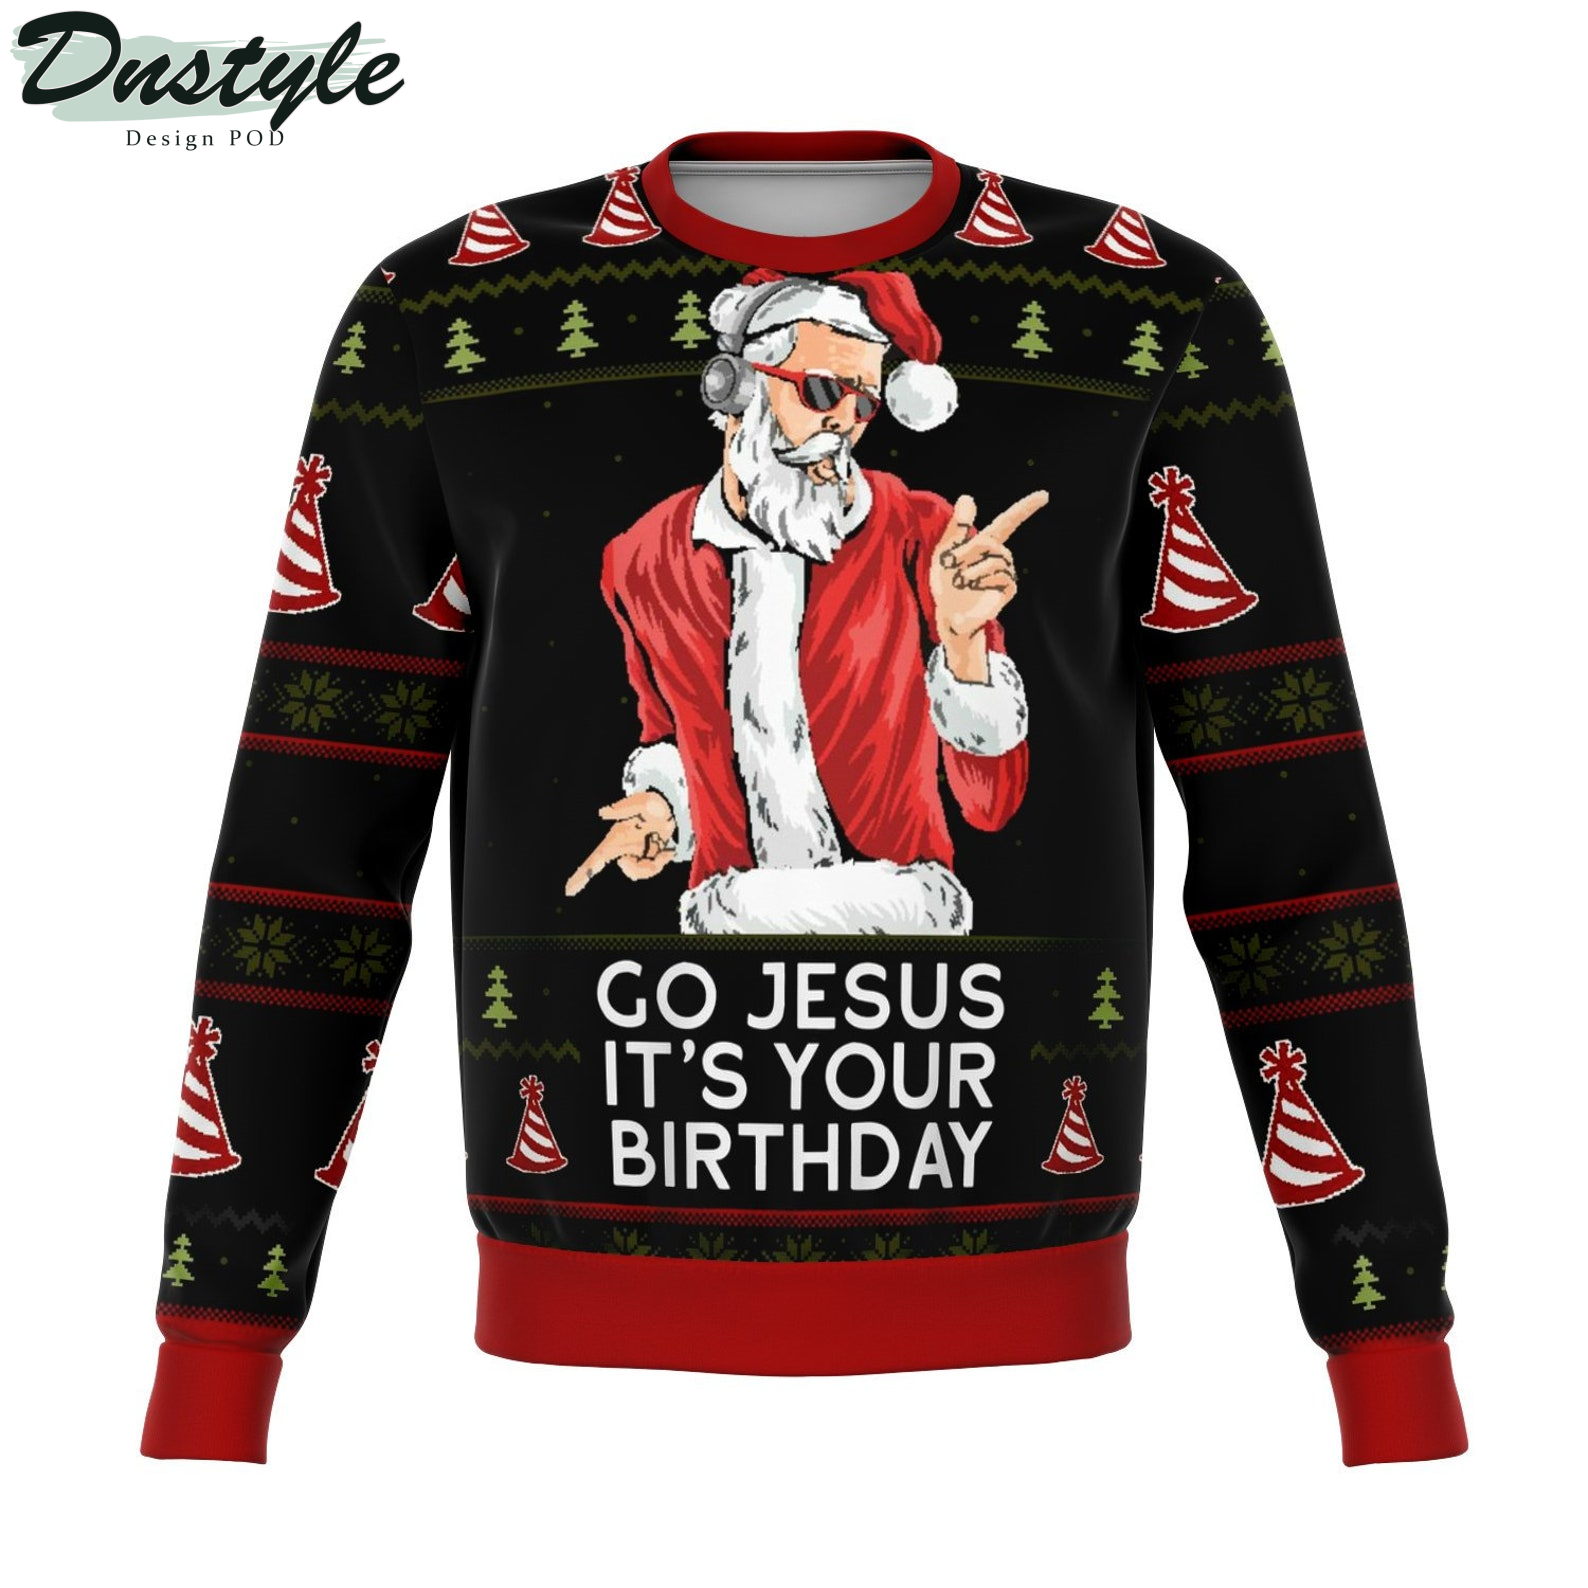 Go Jesus It's Your Birthday 2022 Ugly Christmas Sweater